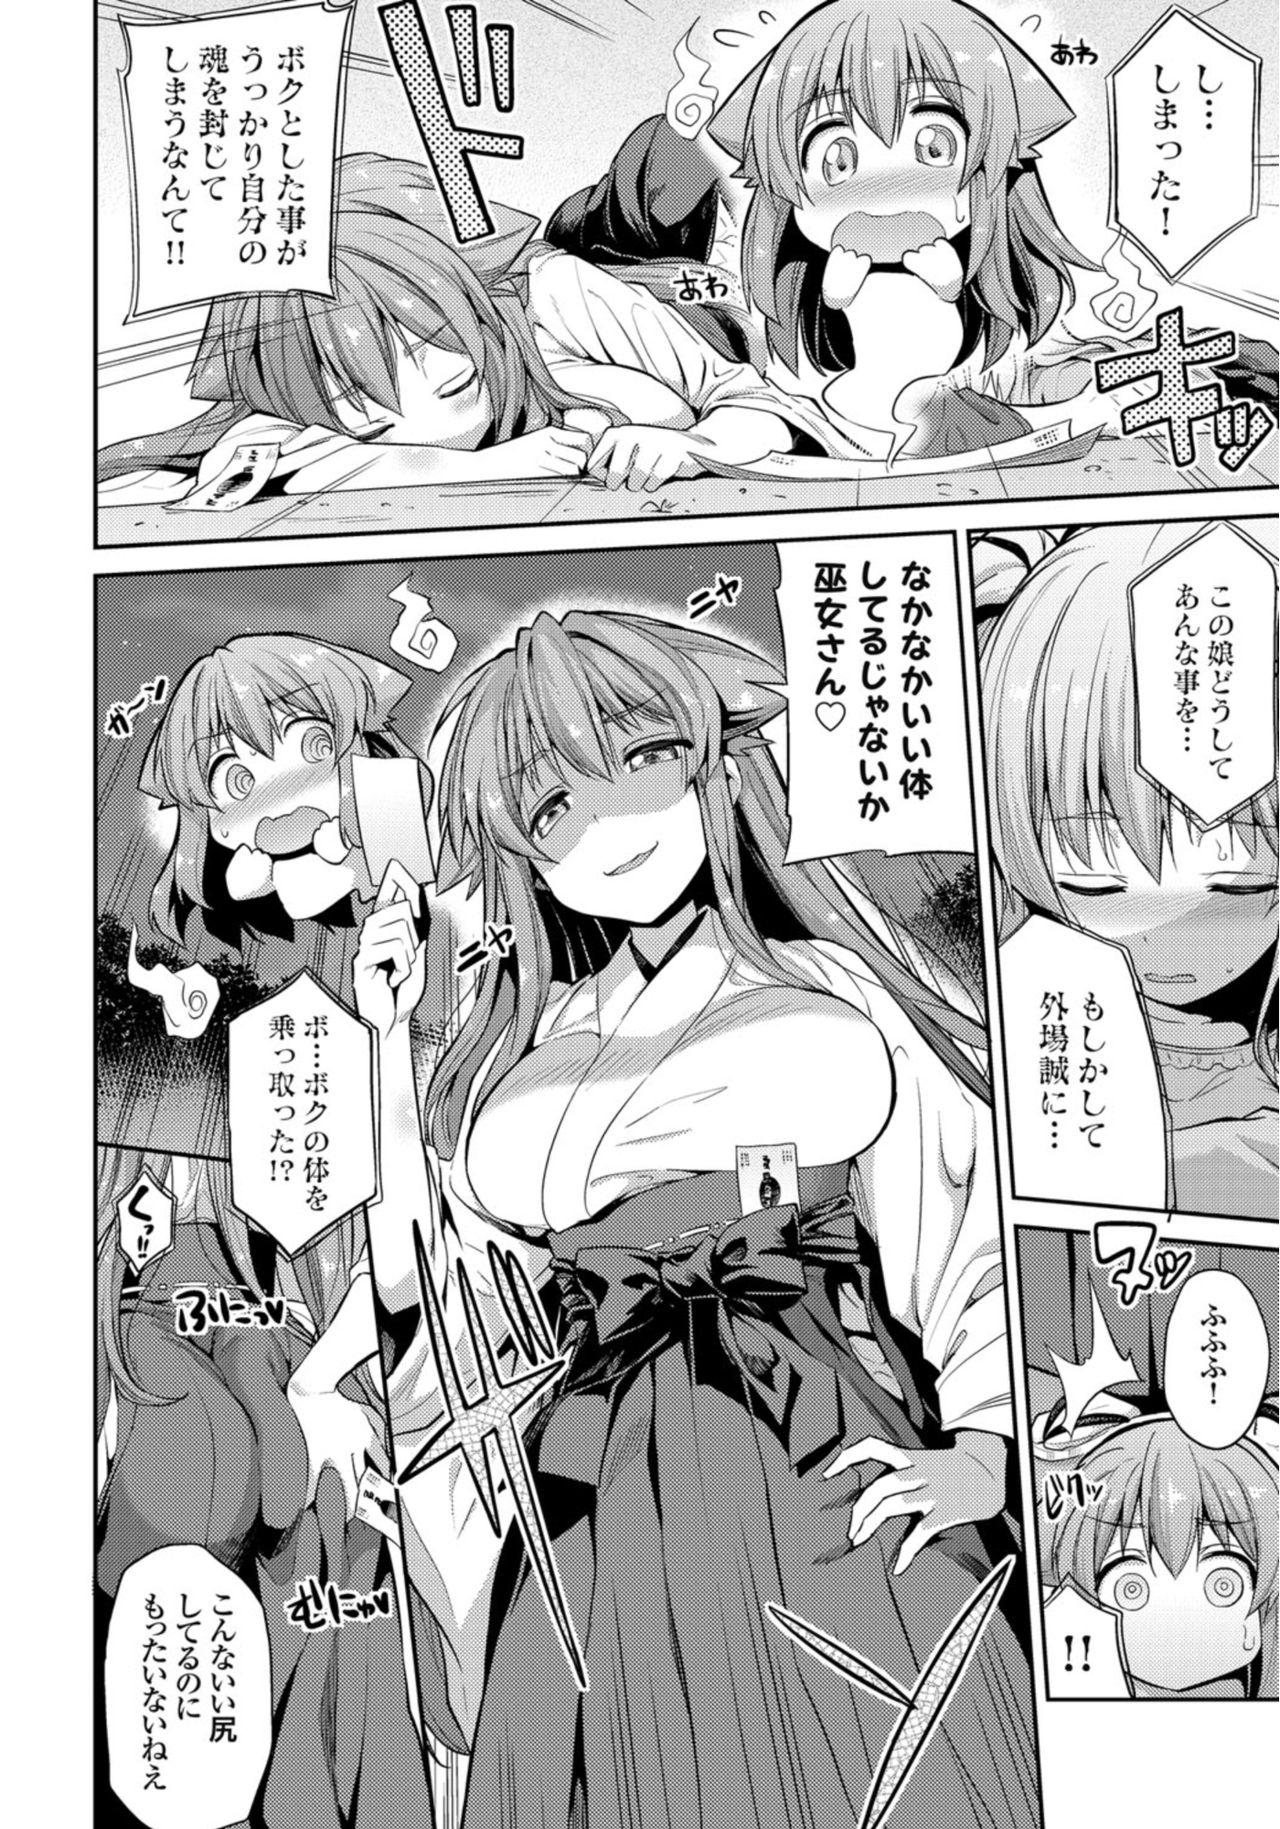 Instagram 憑りつき×乗っ取り×孕ませろ！肆憑き 〜ドロリ濃厚！退魔巫女種付けレイプ！〜 Leaked - Page 4